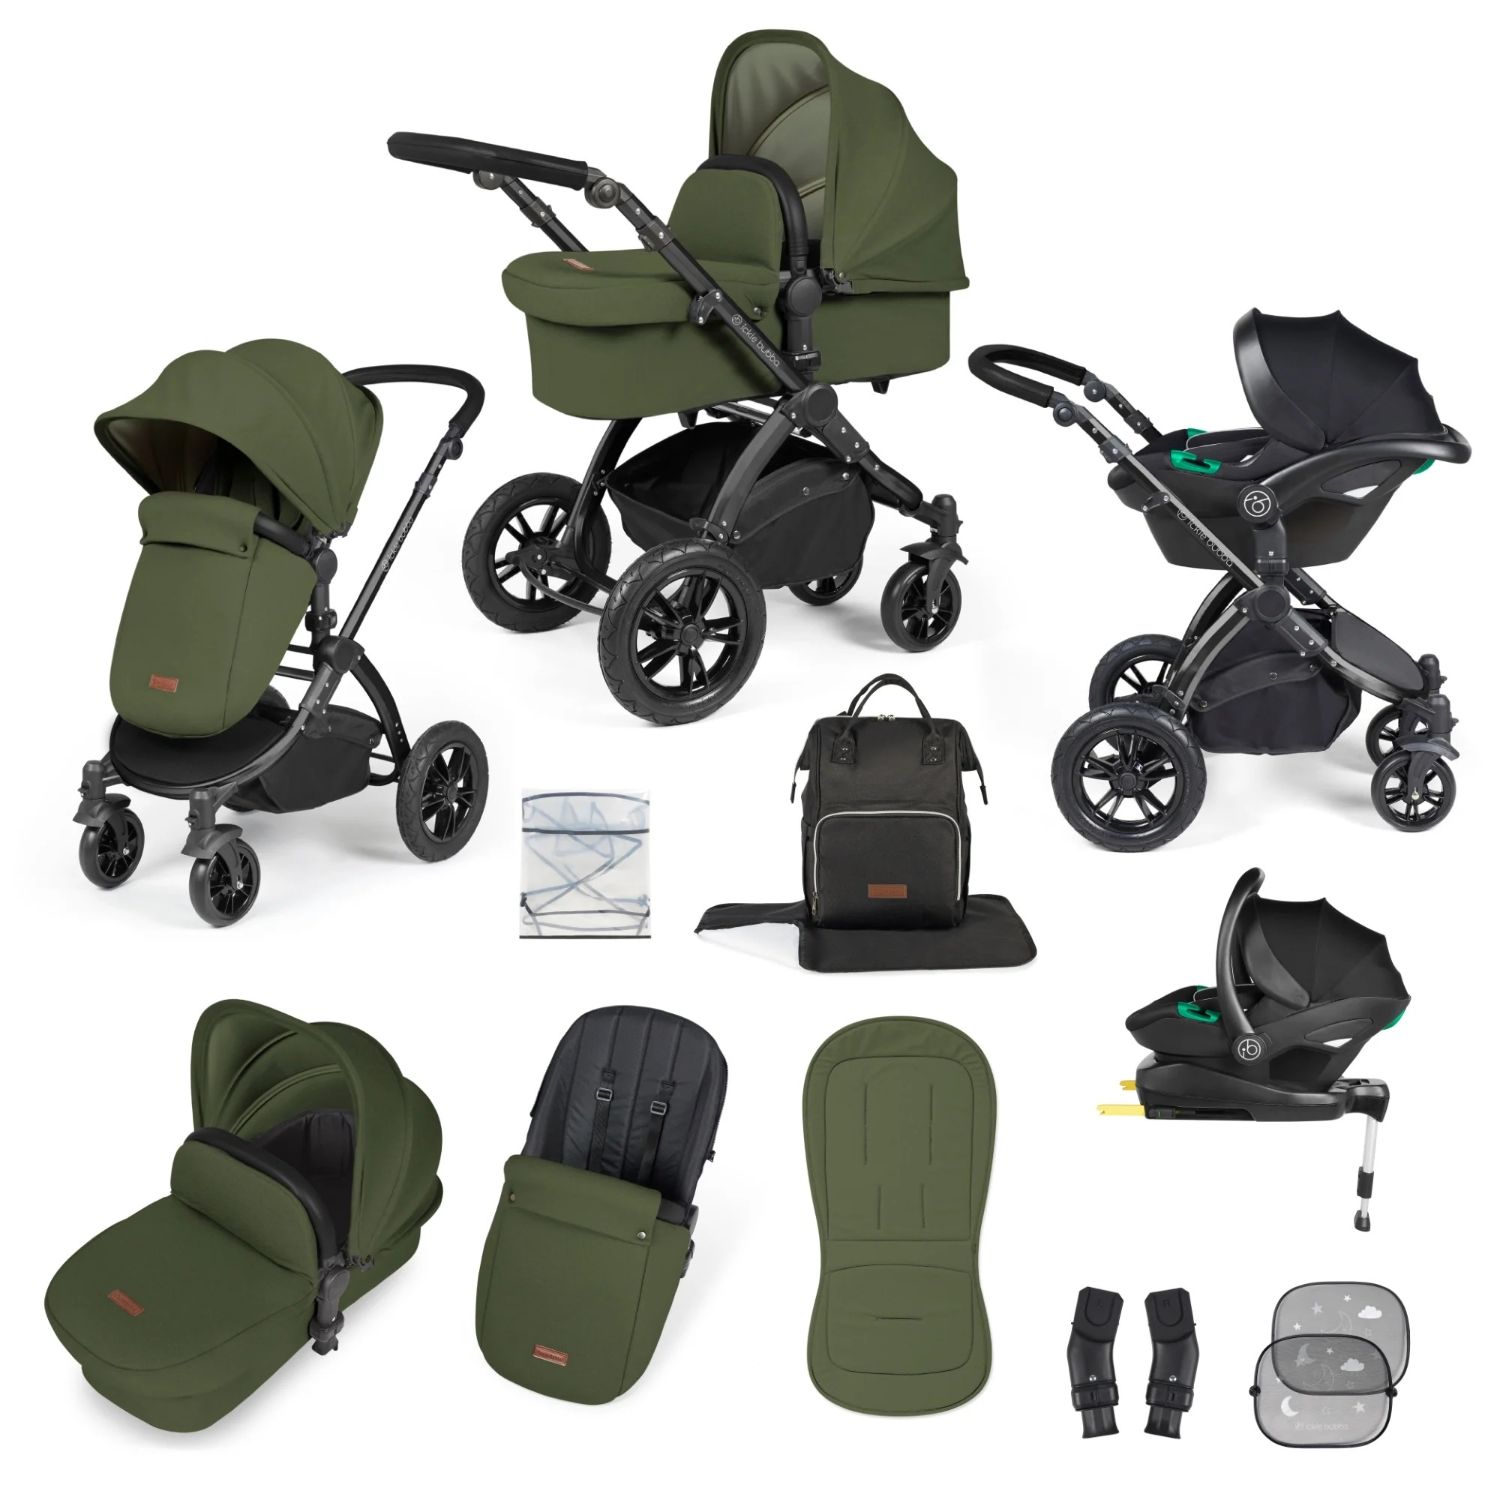 Ickle Bubba Stomp Luxe All-in-One Travel System with Stratus i-Size Car Seat and ISOFIX Base and accessories in Woodland green colour